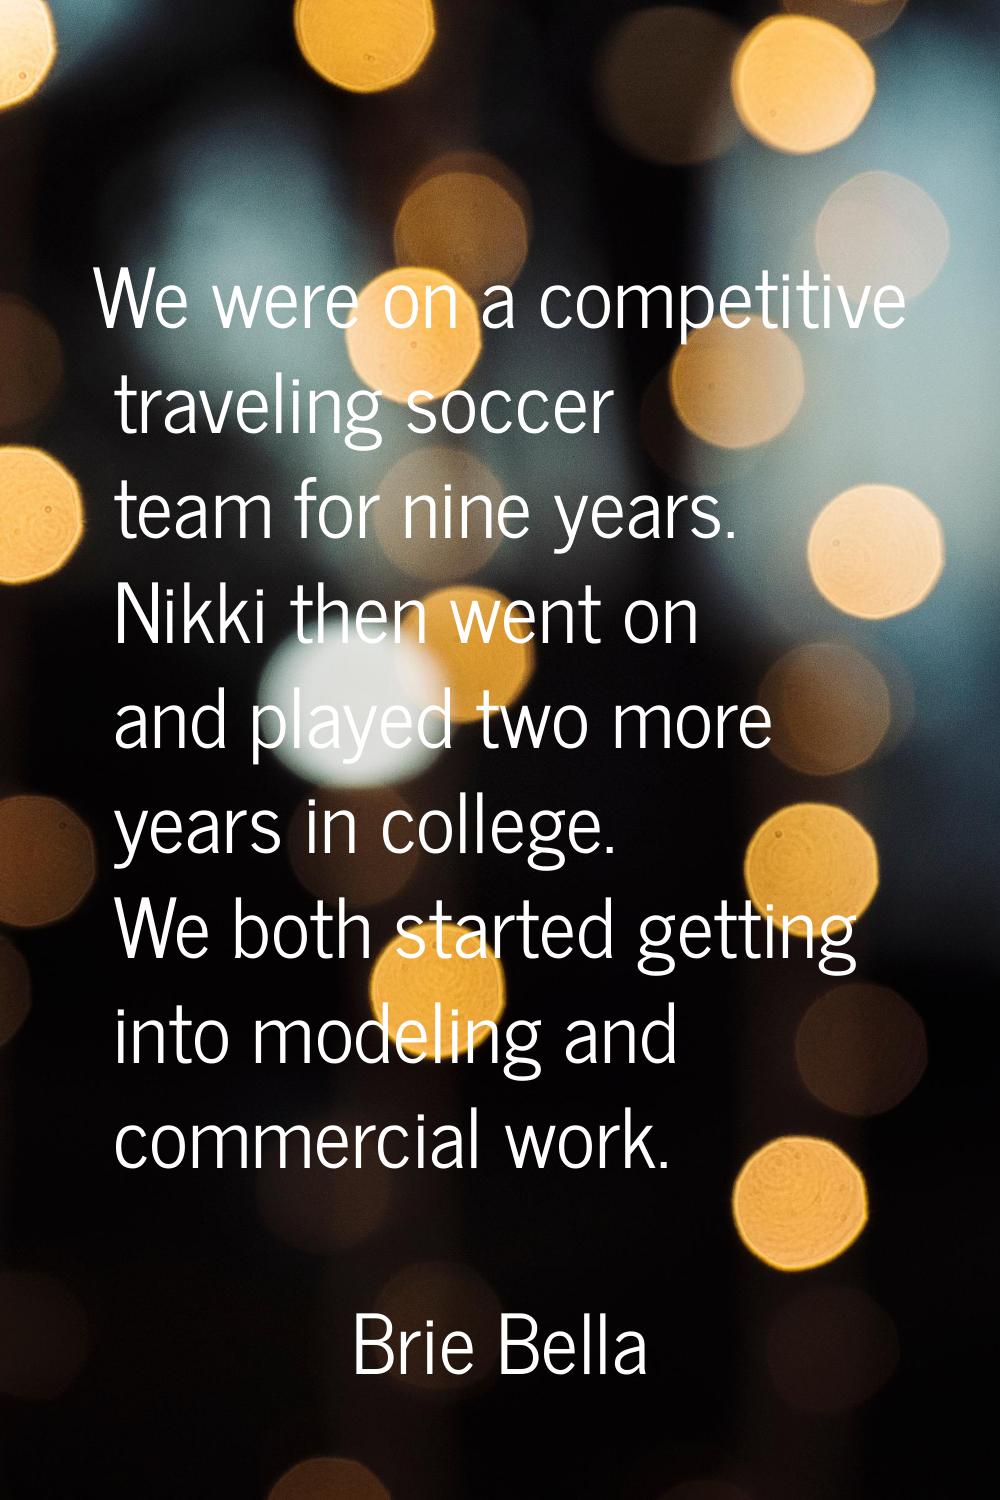 We were on a competitive traveling soccer team for nine years. Nikki then went on and played two mo